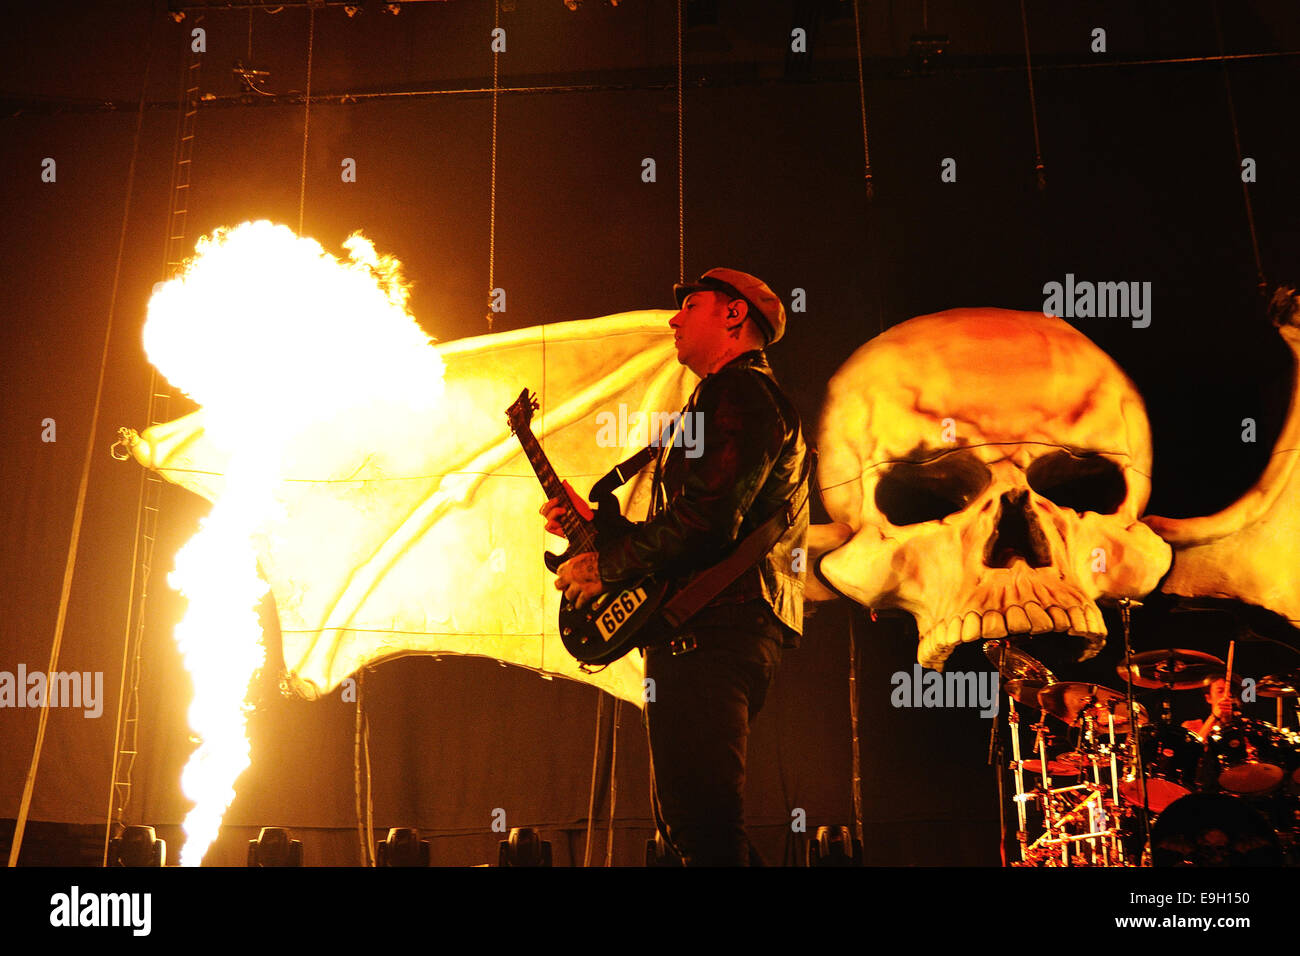 BARCELONA - NOV 25: Avenged Sevenfold, famous heavy metal band with over 15 million fans on Facebook. Stock Photo